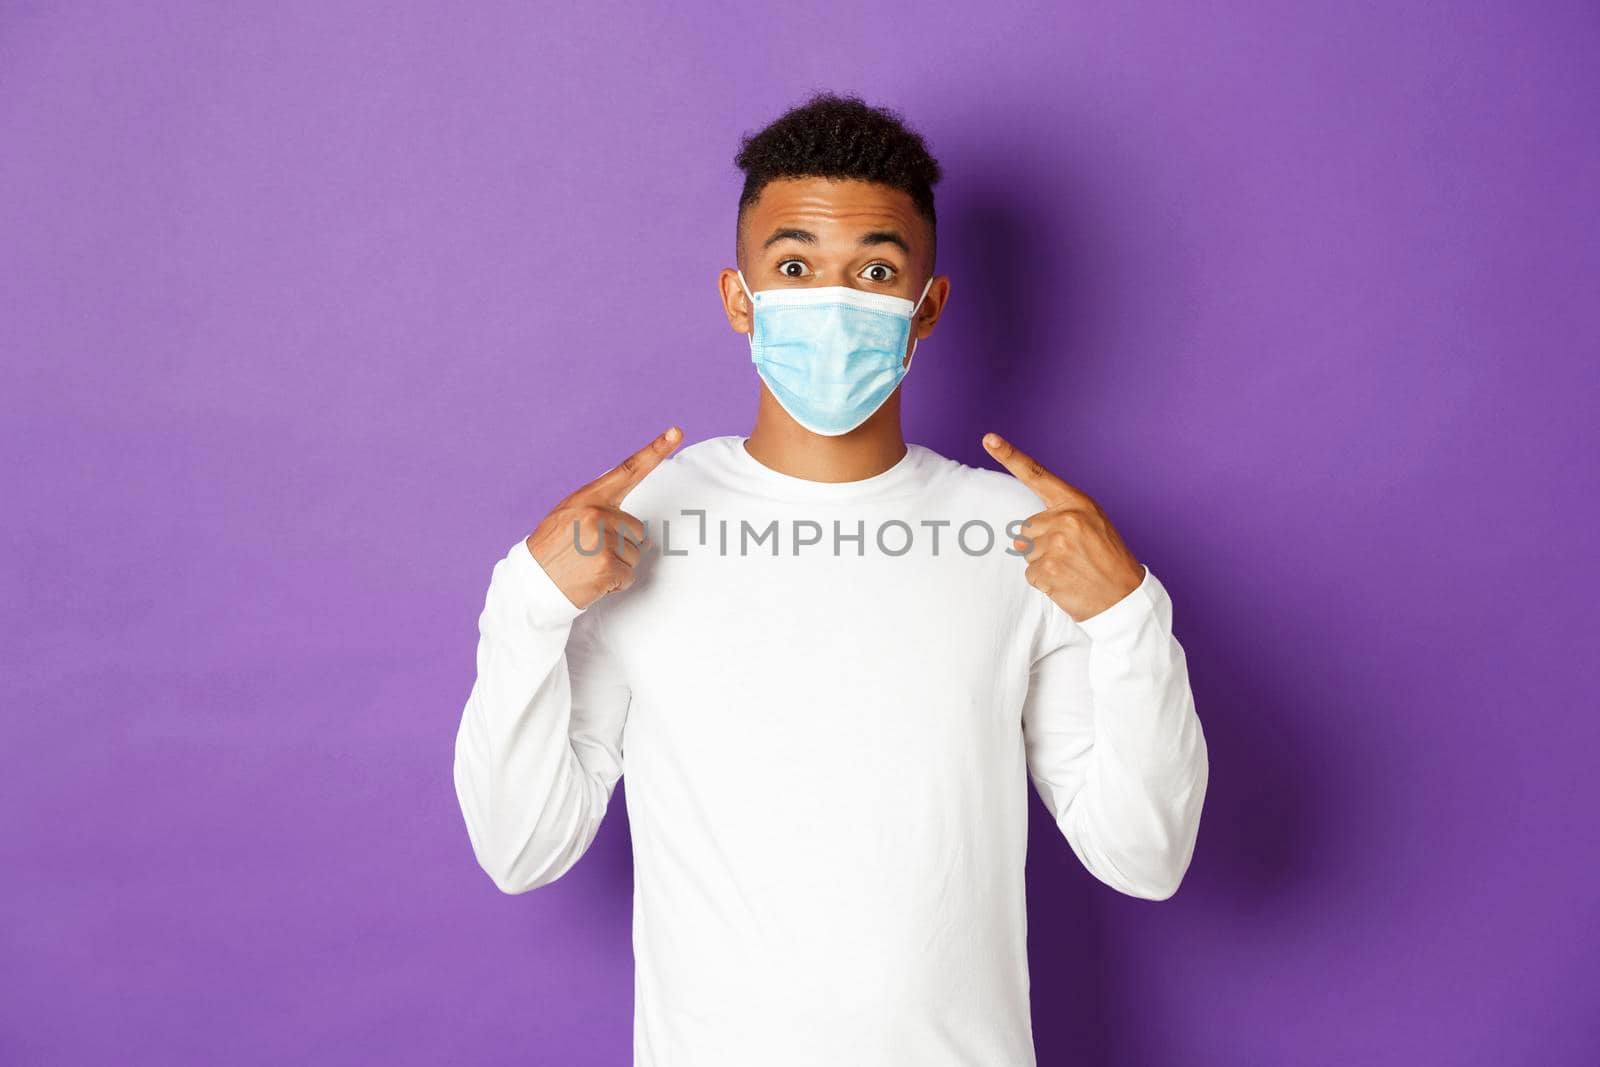 Concept of covid-19, pandemic and social distancing. Image of amused african-american guy, recommend to wear medical mask during coronavirus, standing over purple background.